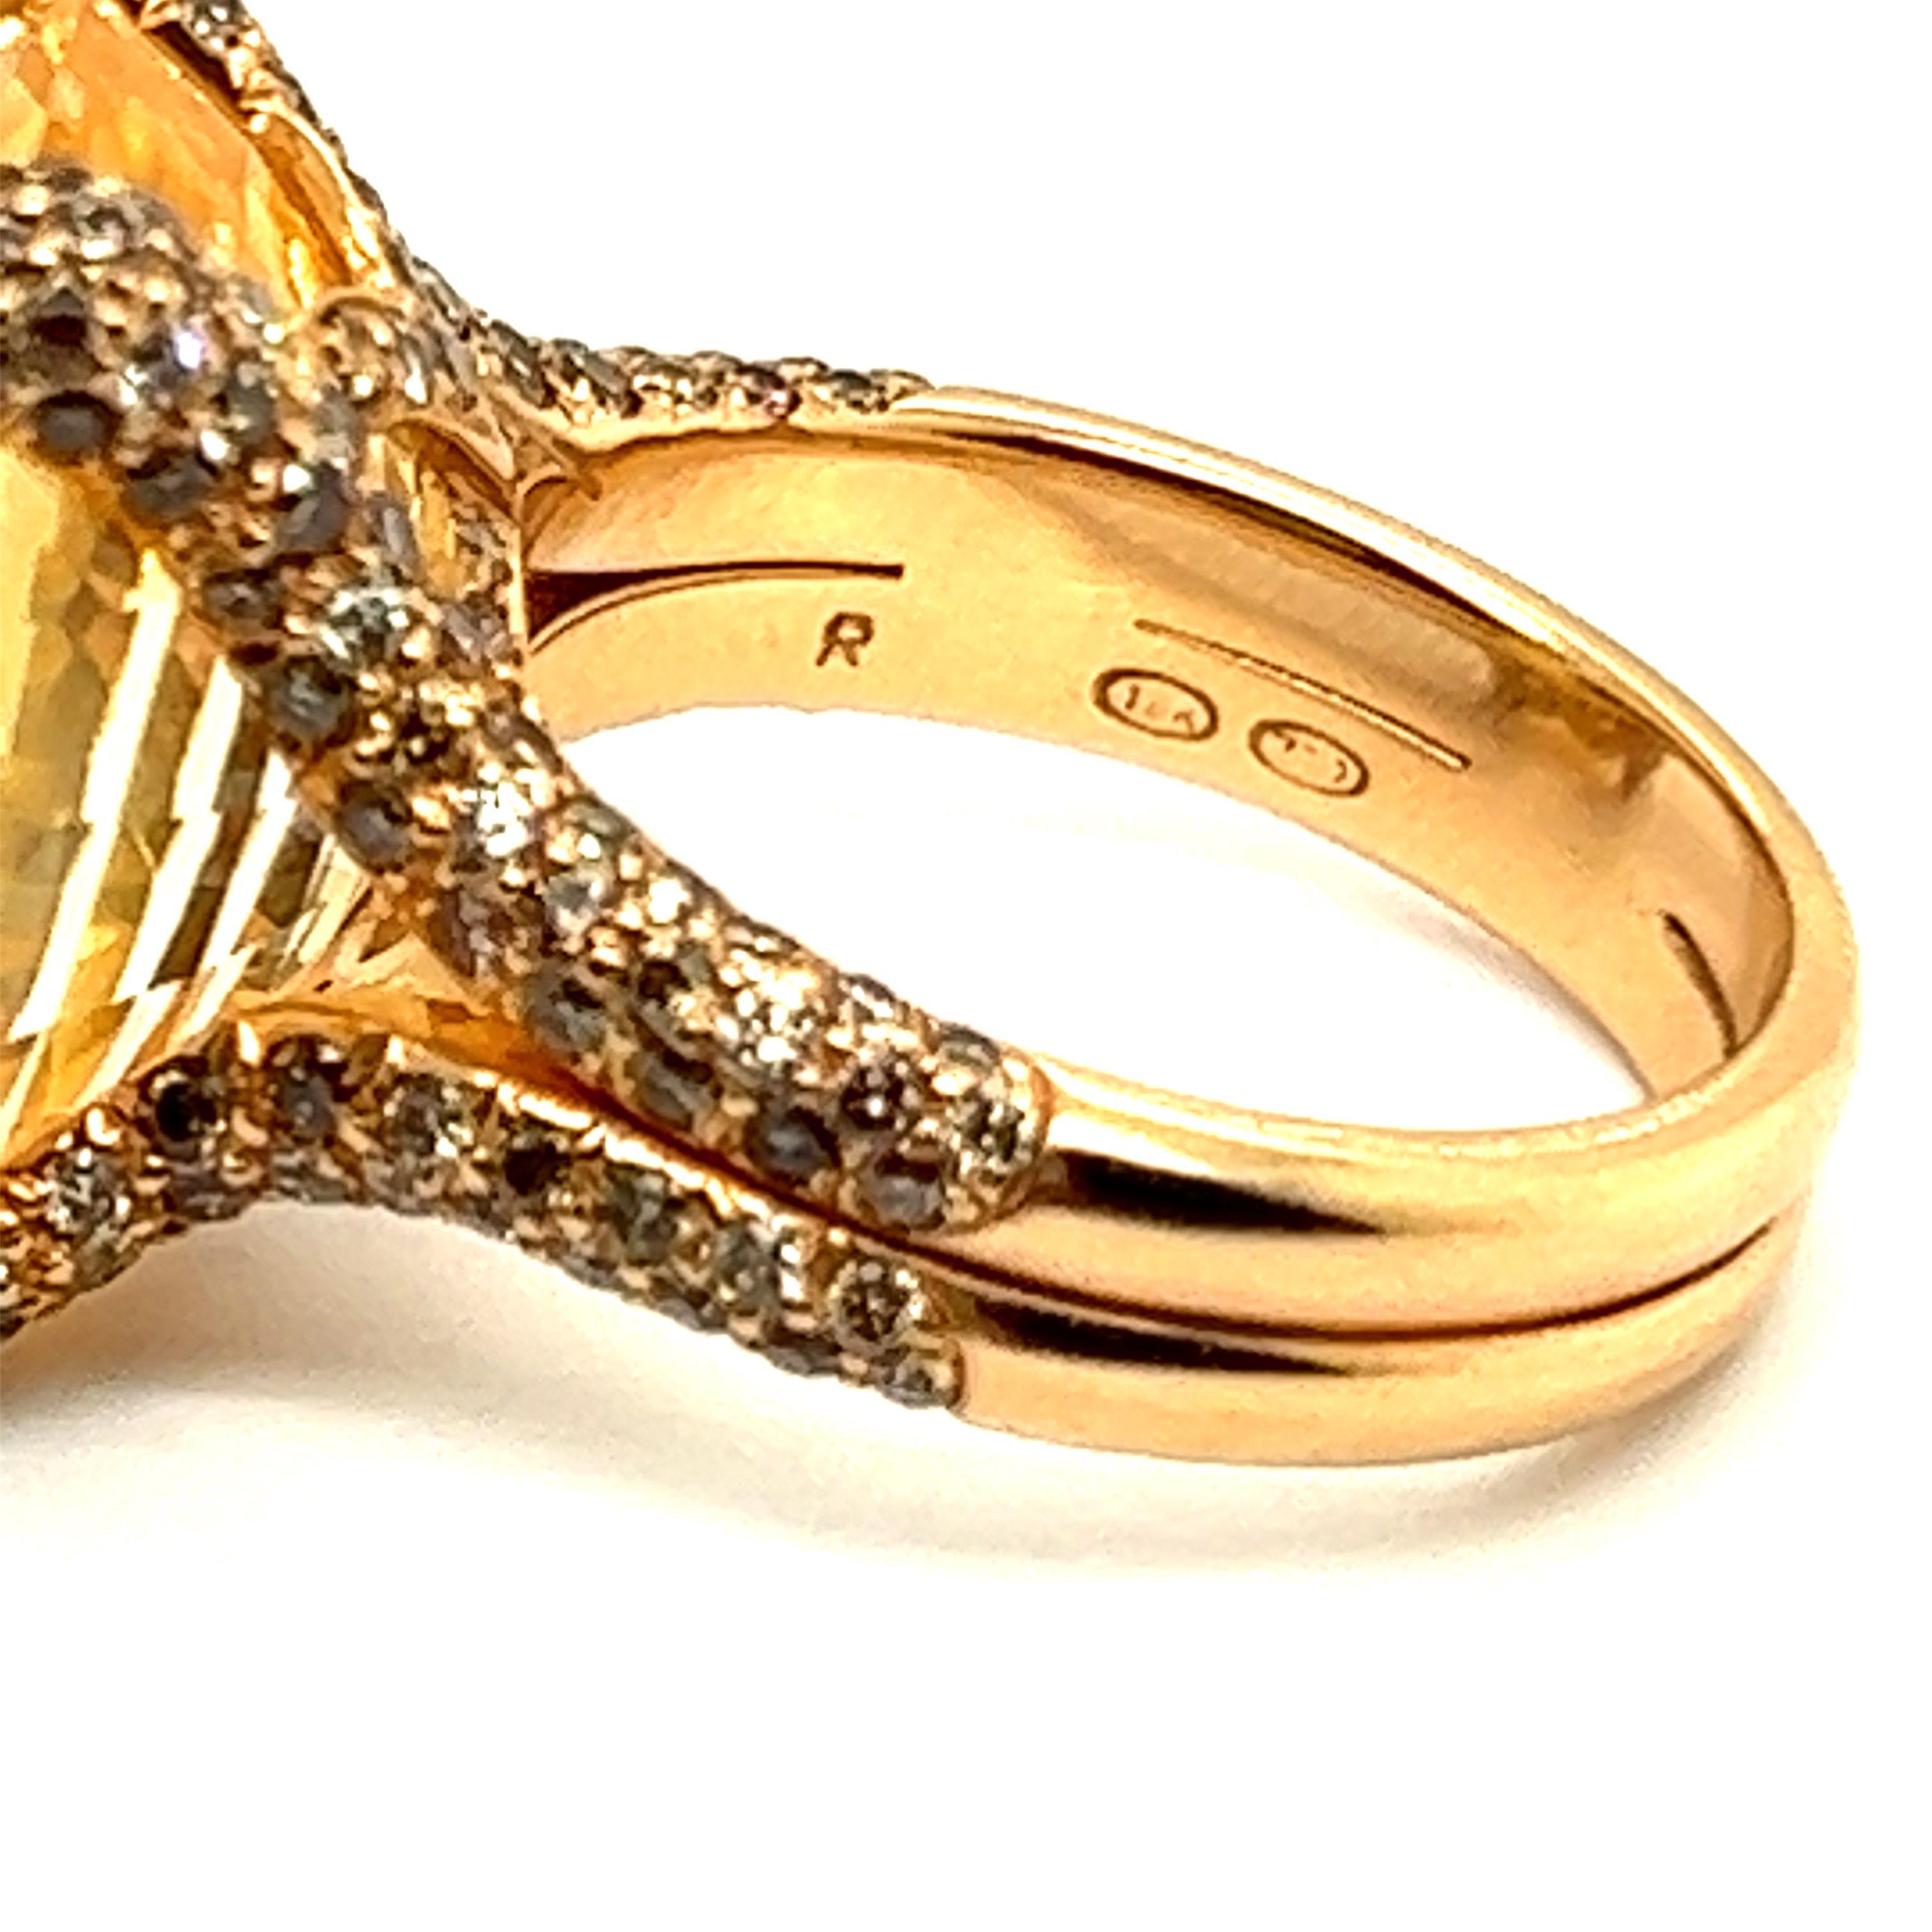 Exceptional Yellow Sapphire and Diamond Ring in 18 Karat Yellow Gold 2